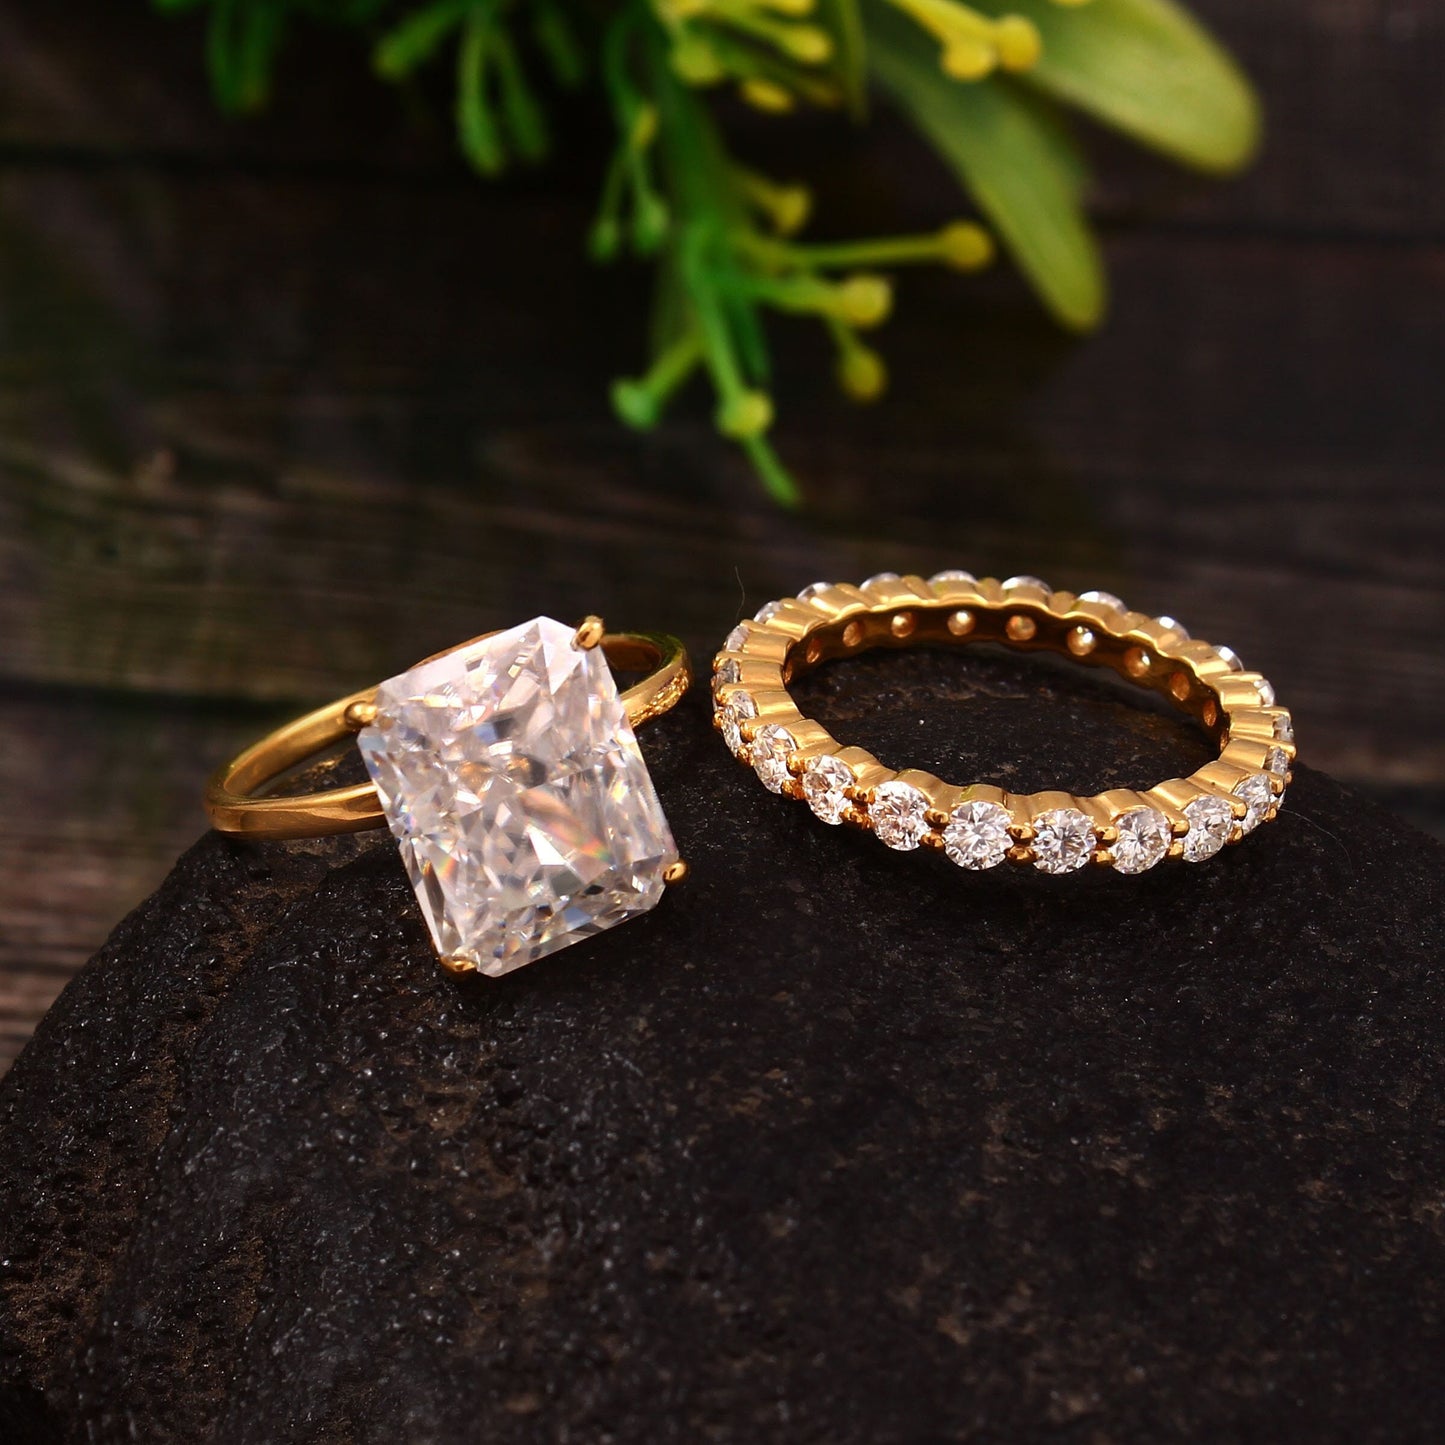 Radiant Moissanite Gold Ring with infinity band -  Moissanite Bridal Wedding Ring Set - 2 ring set